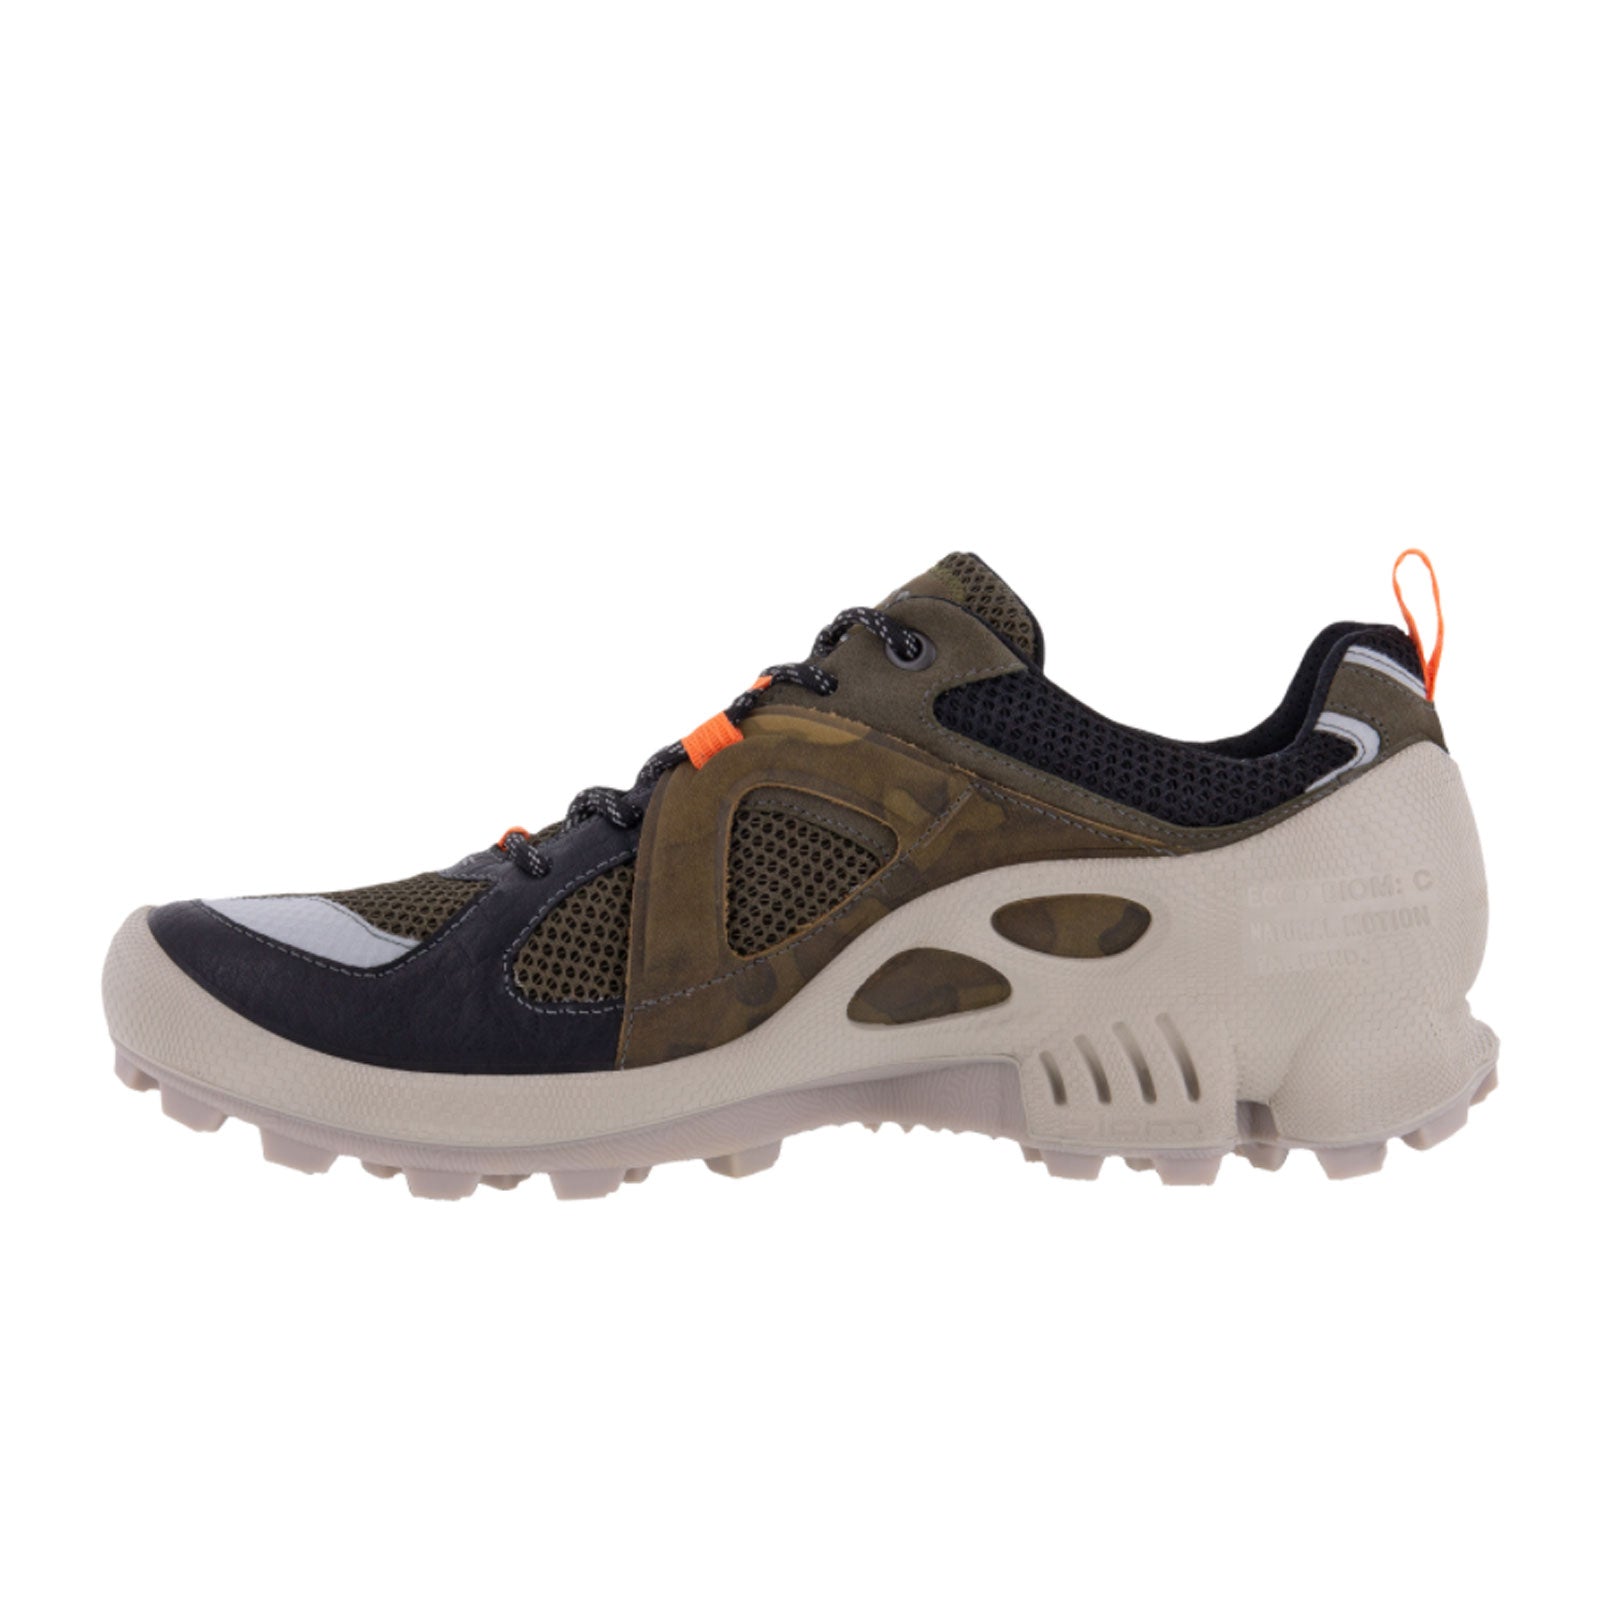 Venlighed Grunde Soaked Ecco Biom C-Trail Hiking Shoe (Men) - Multicolor Tarmac Camo - The Heel  Shoe Fitters